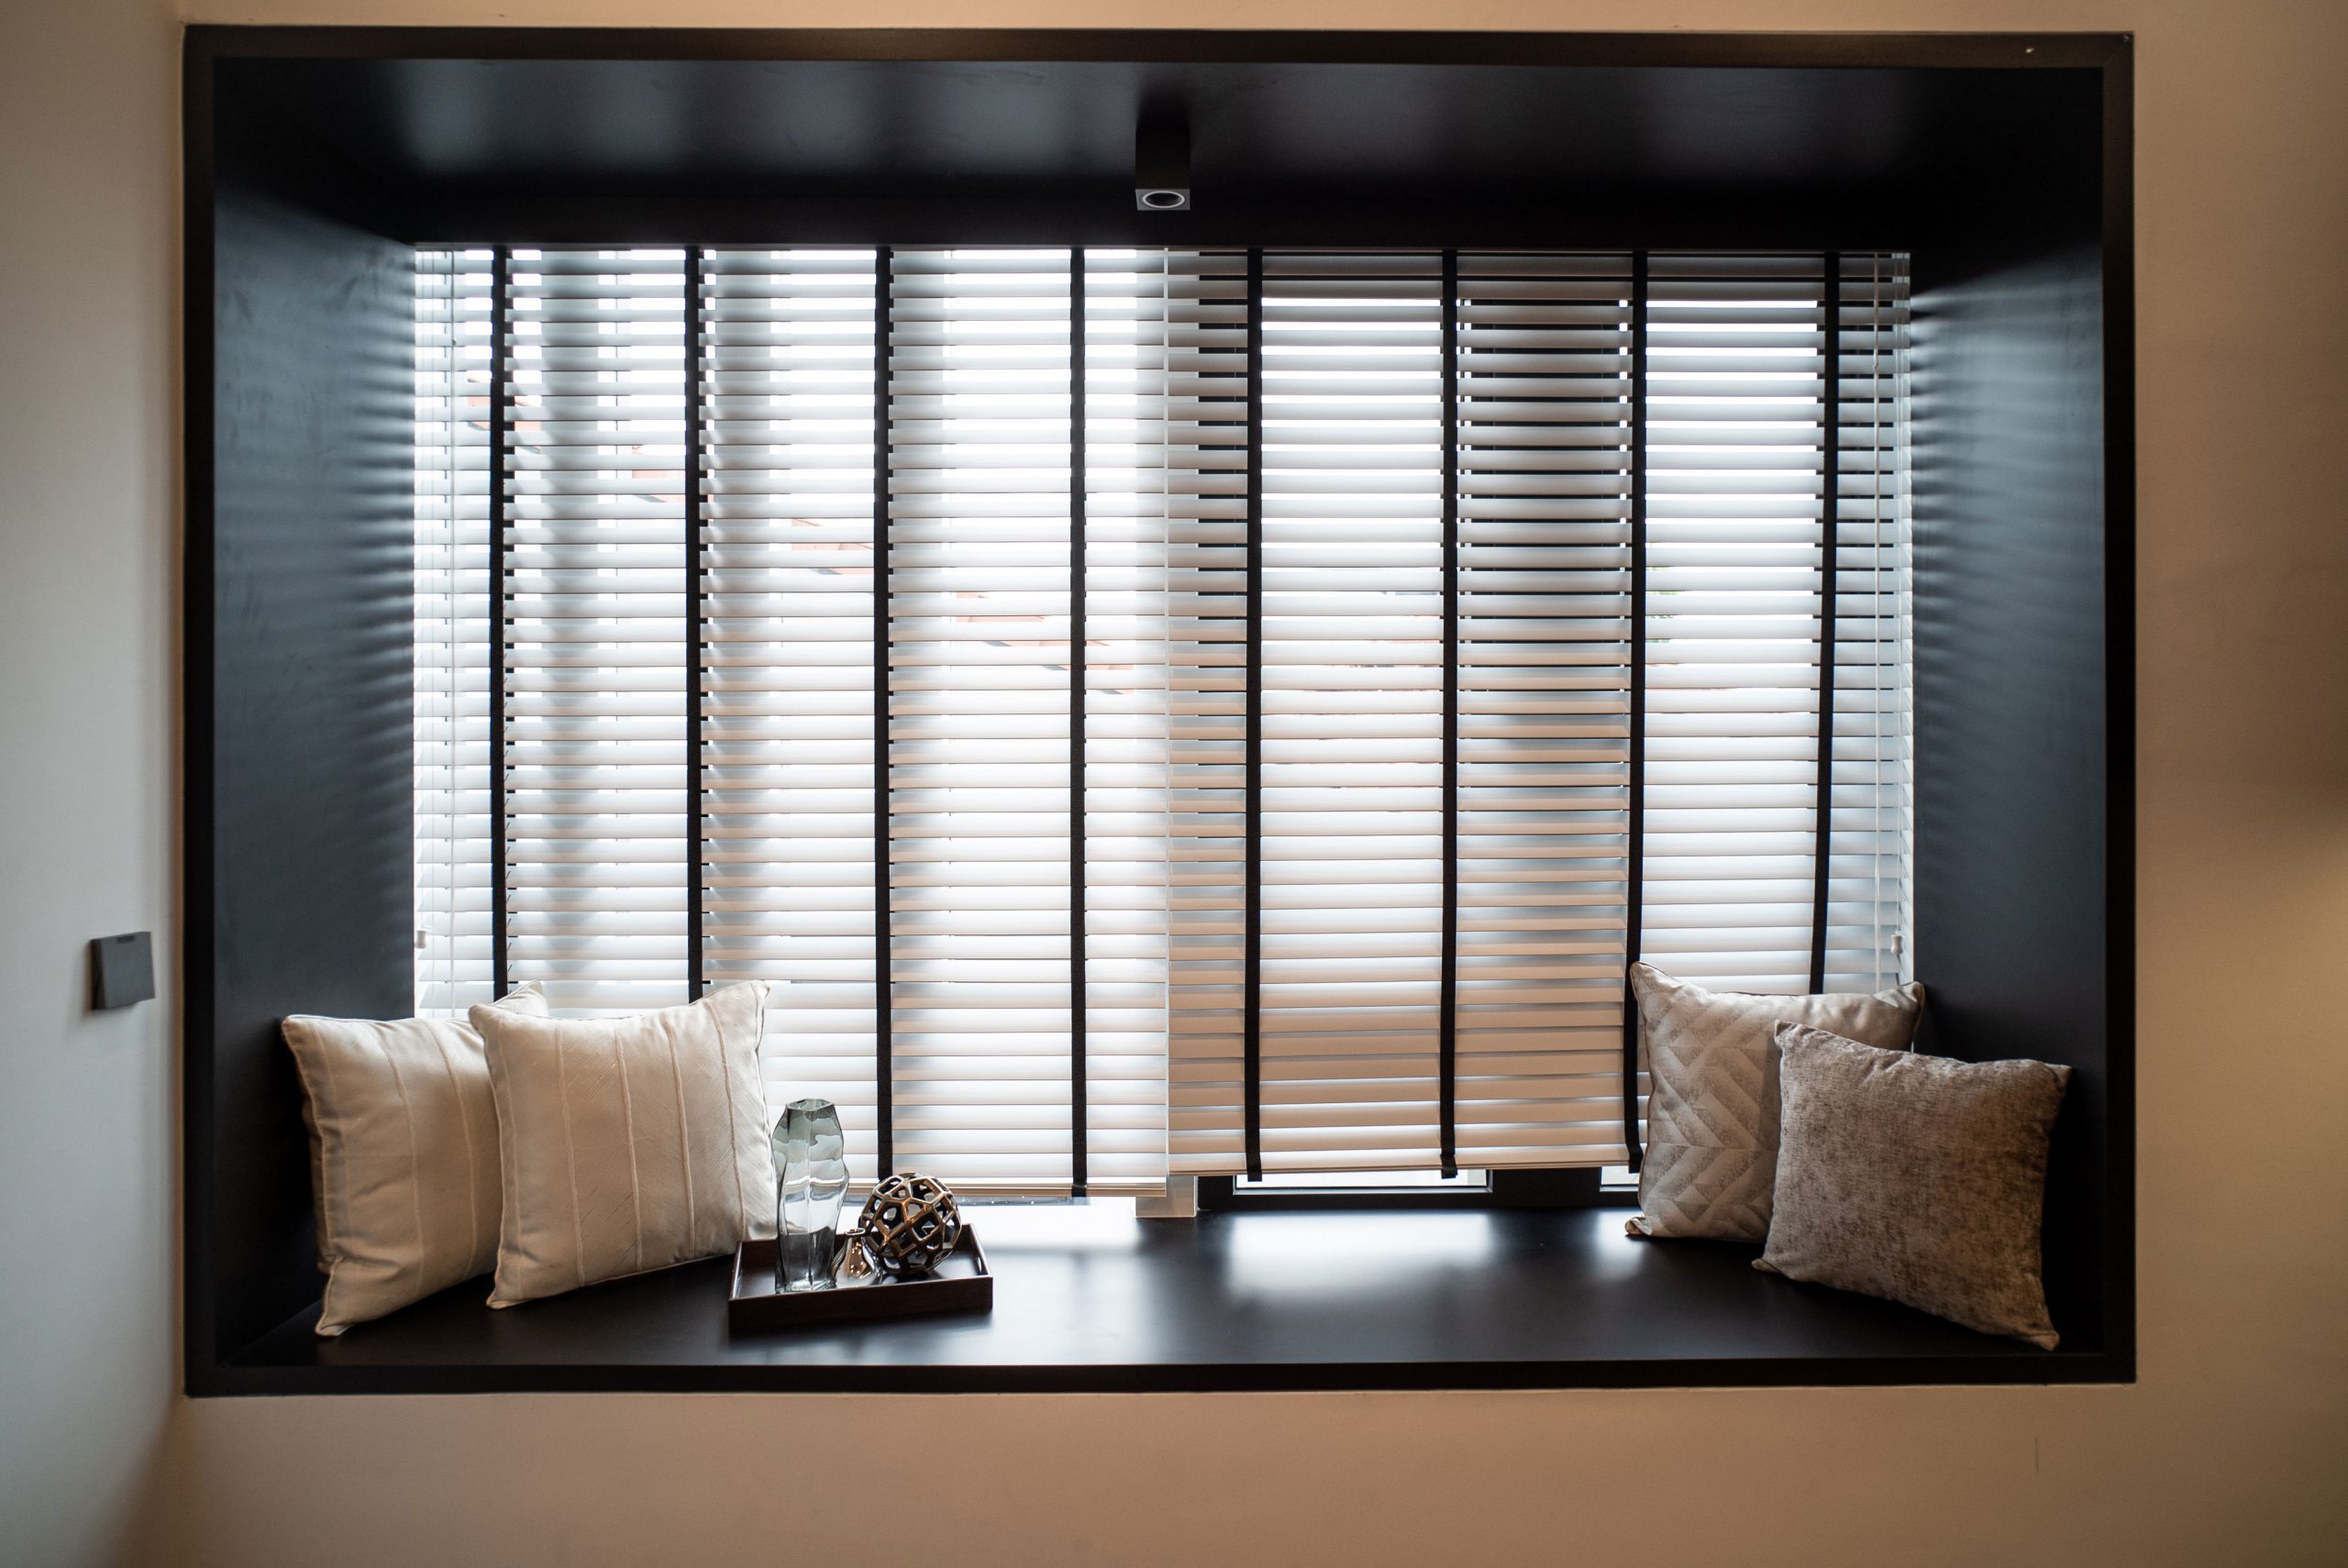 Bay window design for modern luxury interior of landed property with vertical shutter blinds